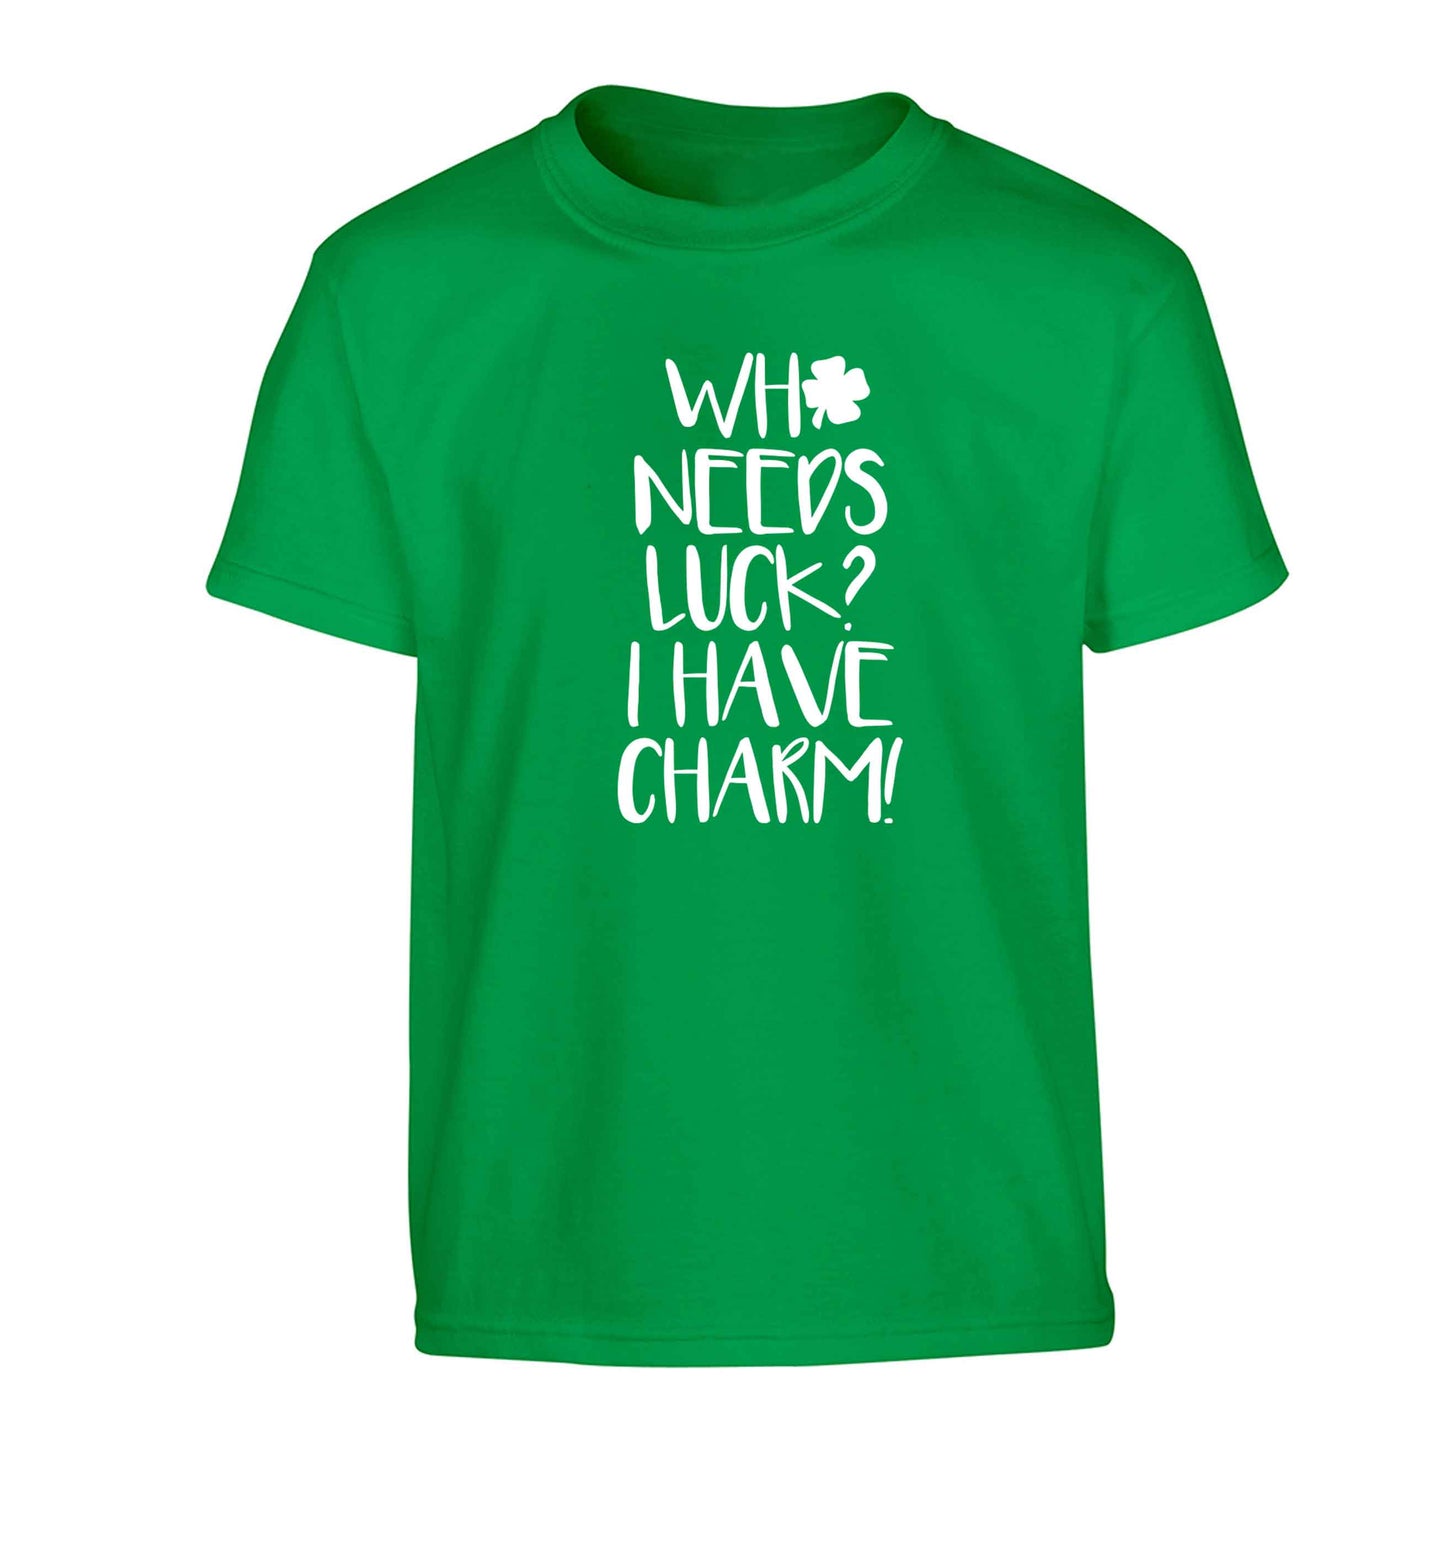 Who needs luck? I have charm! Children's green Tshirt 12-13 Years